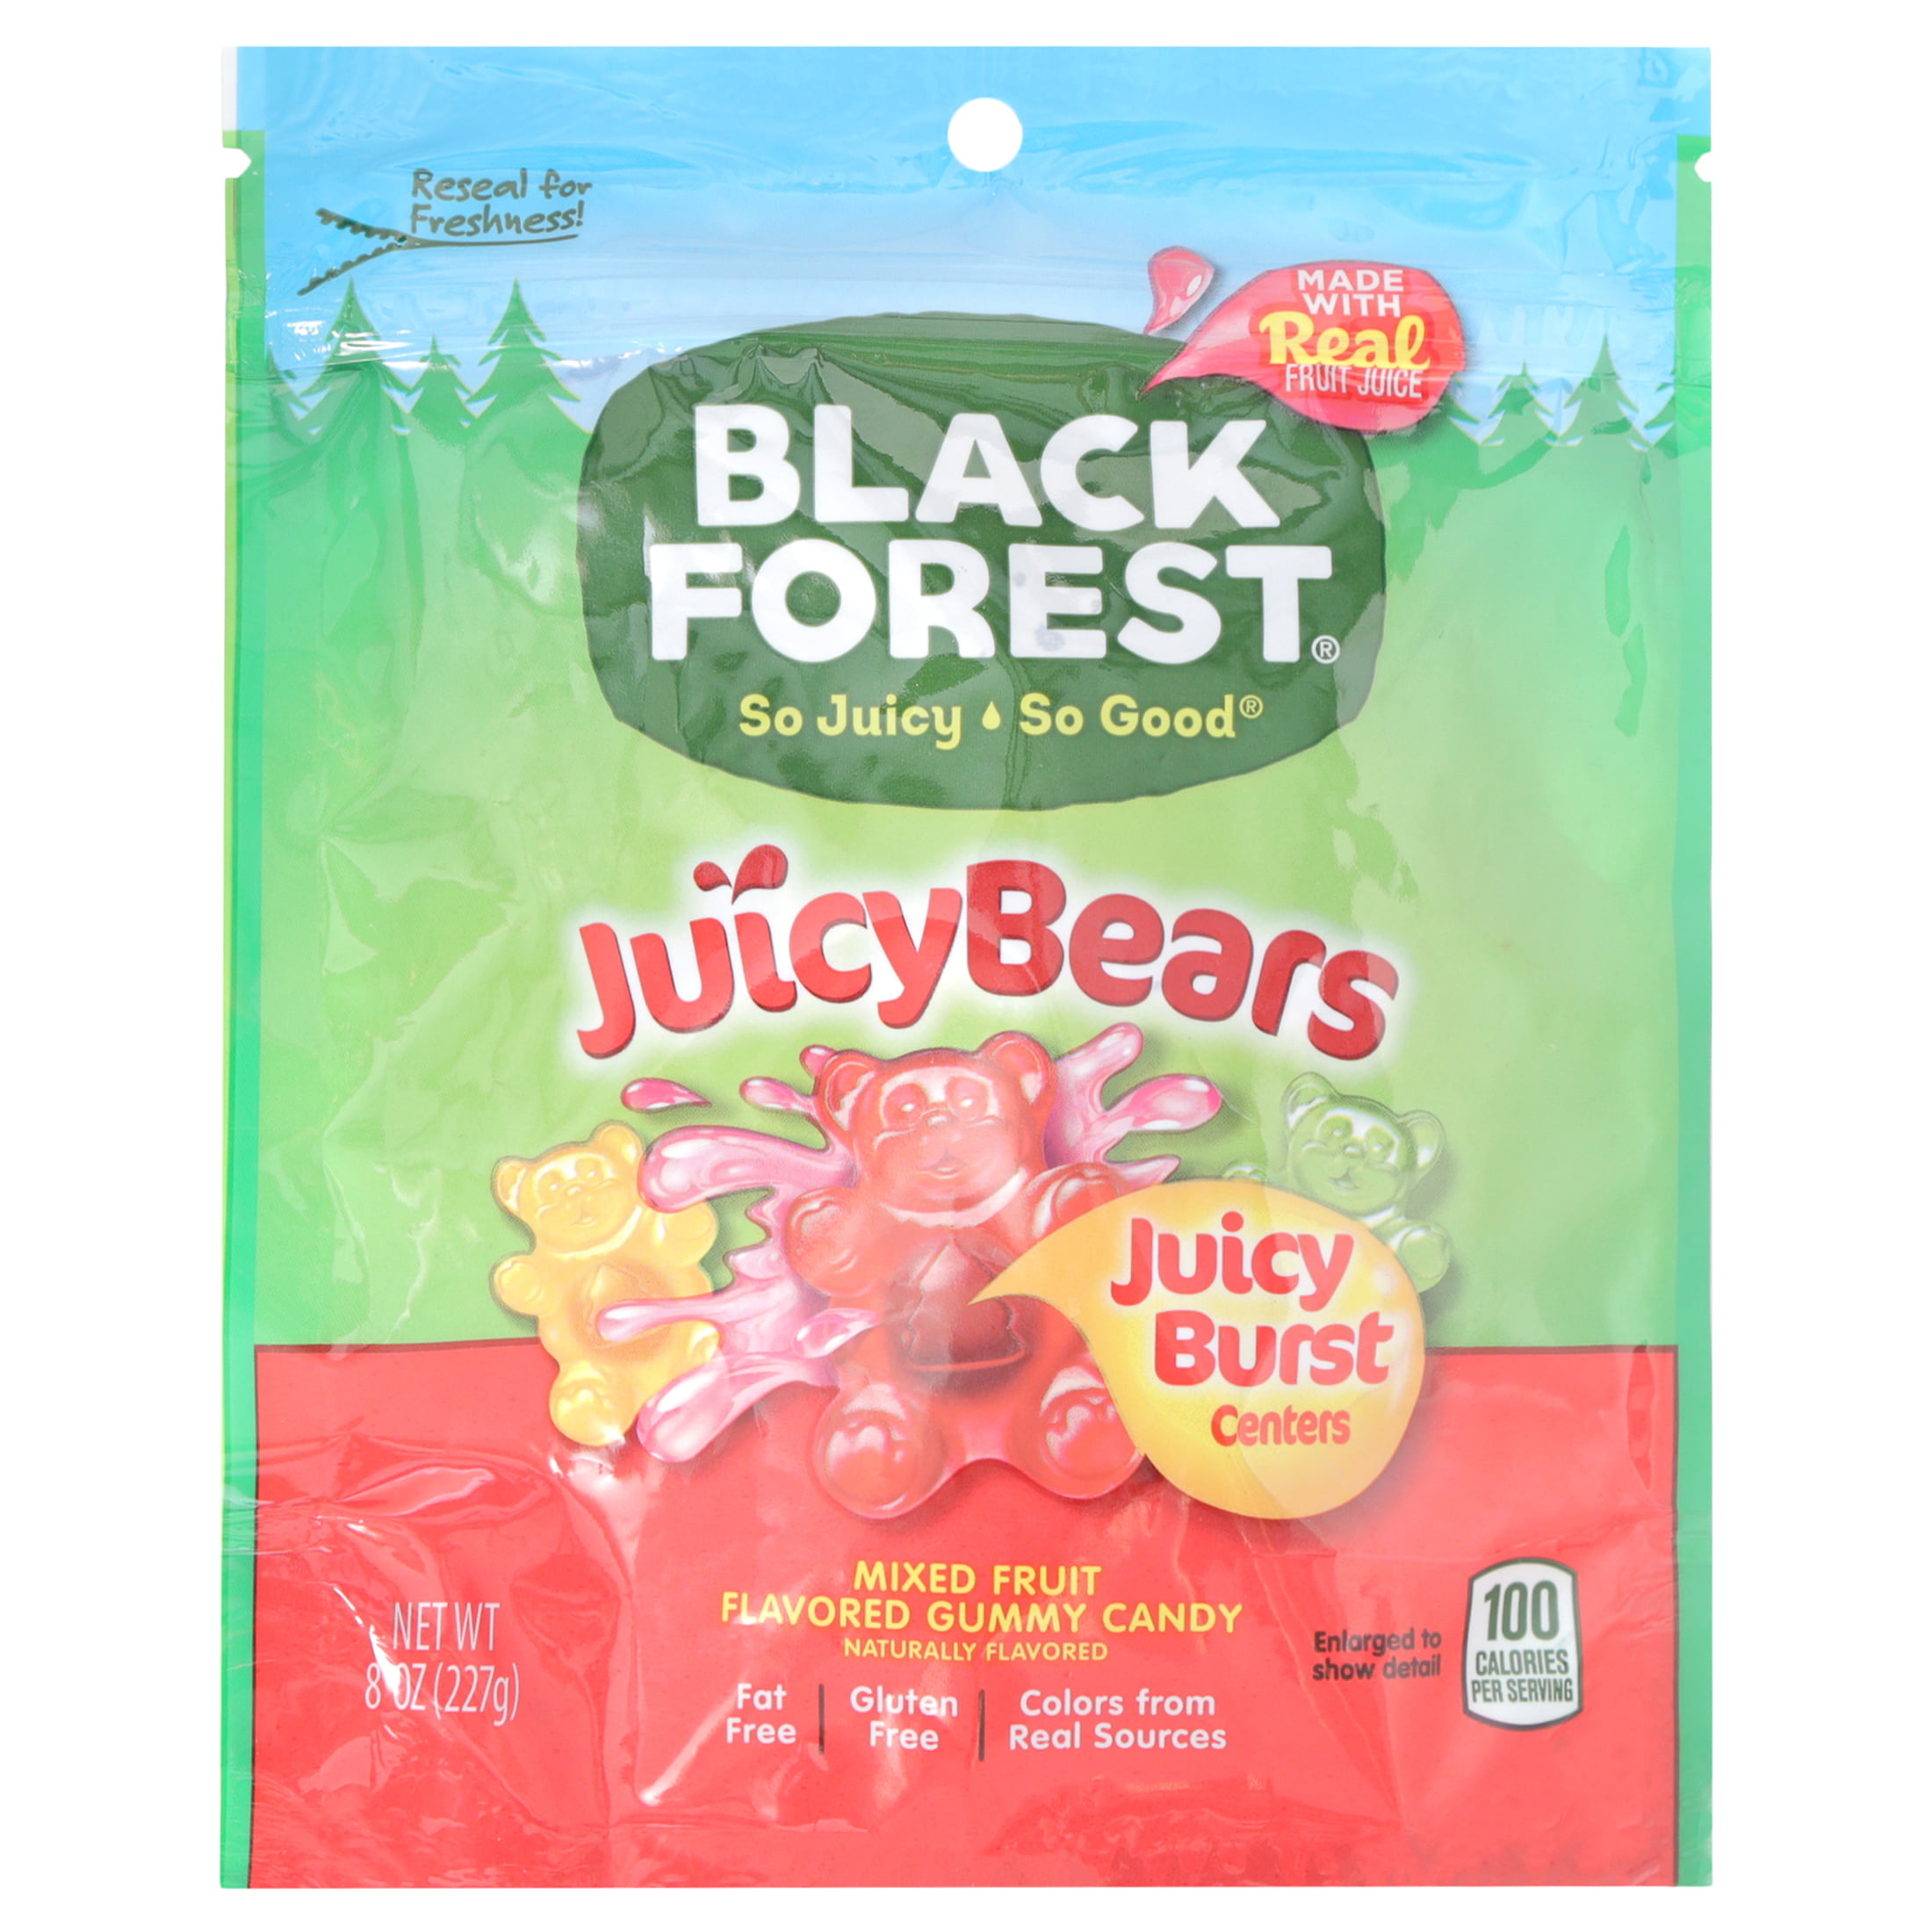 Save on Black Forest Gummy Bears Candy Fat & Gluten Free Order Online  Delivery